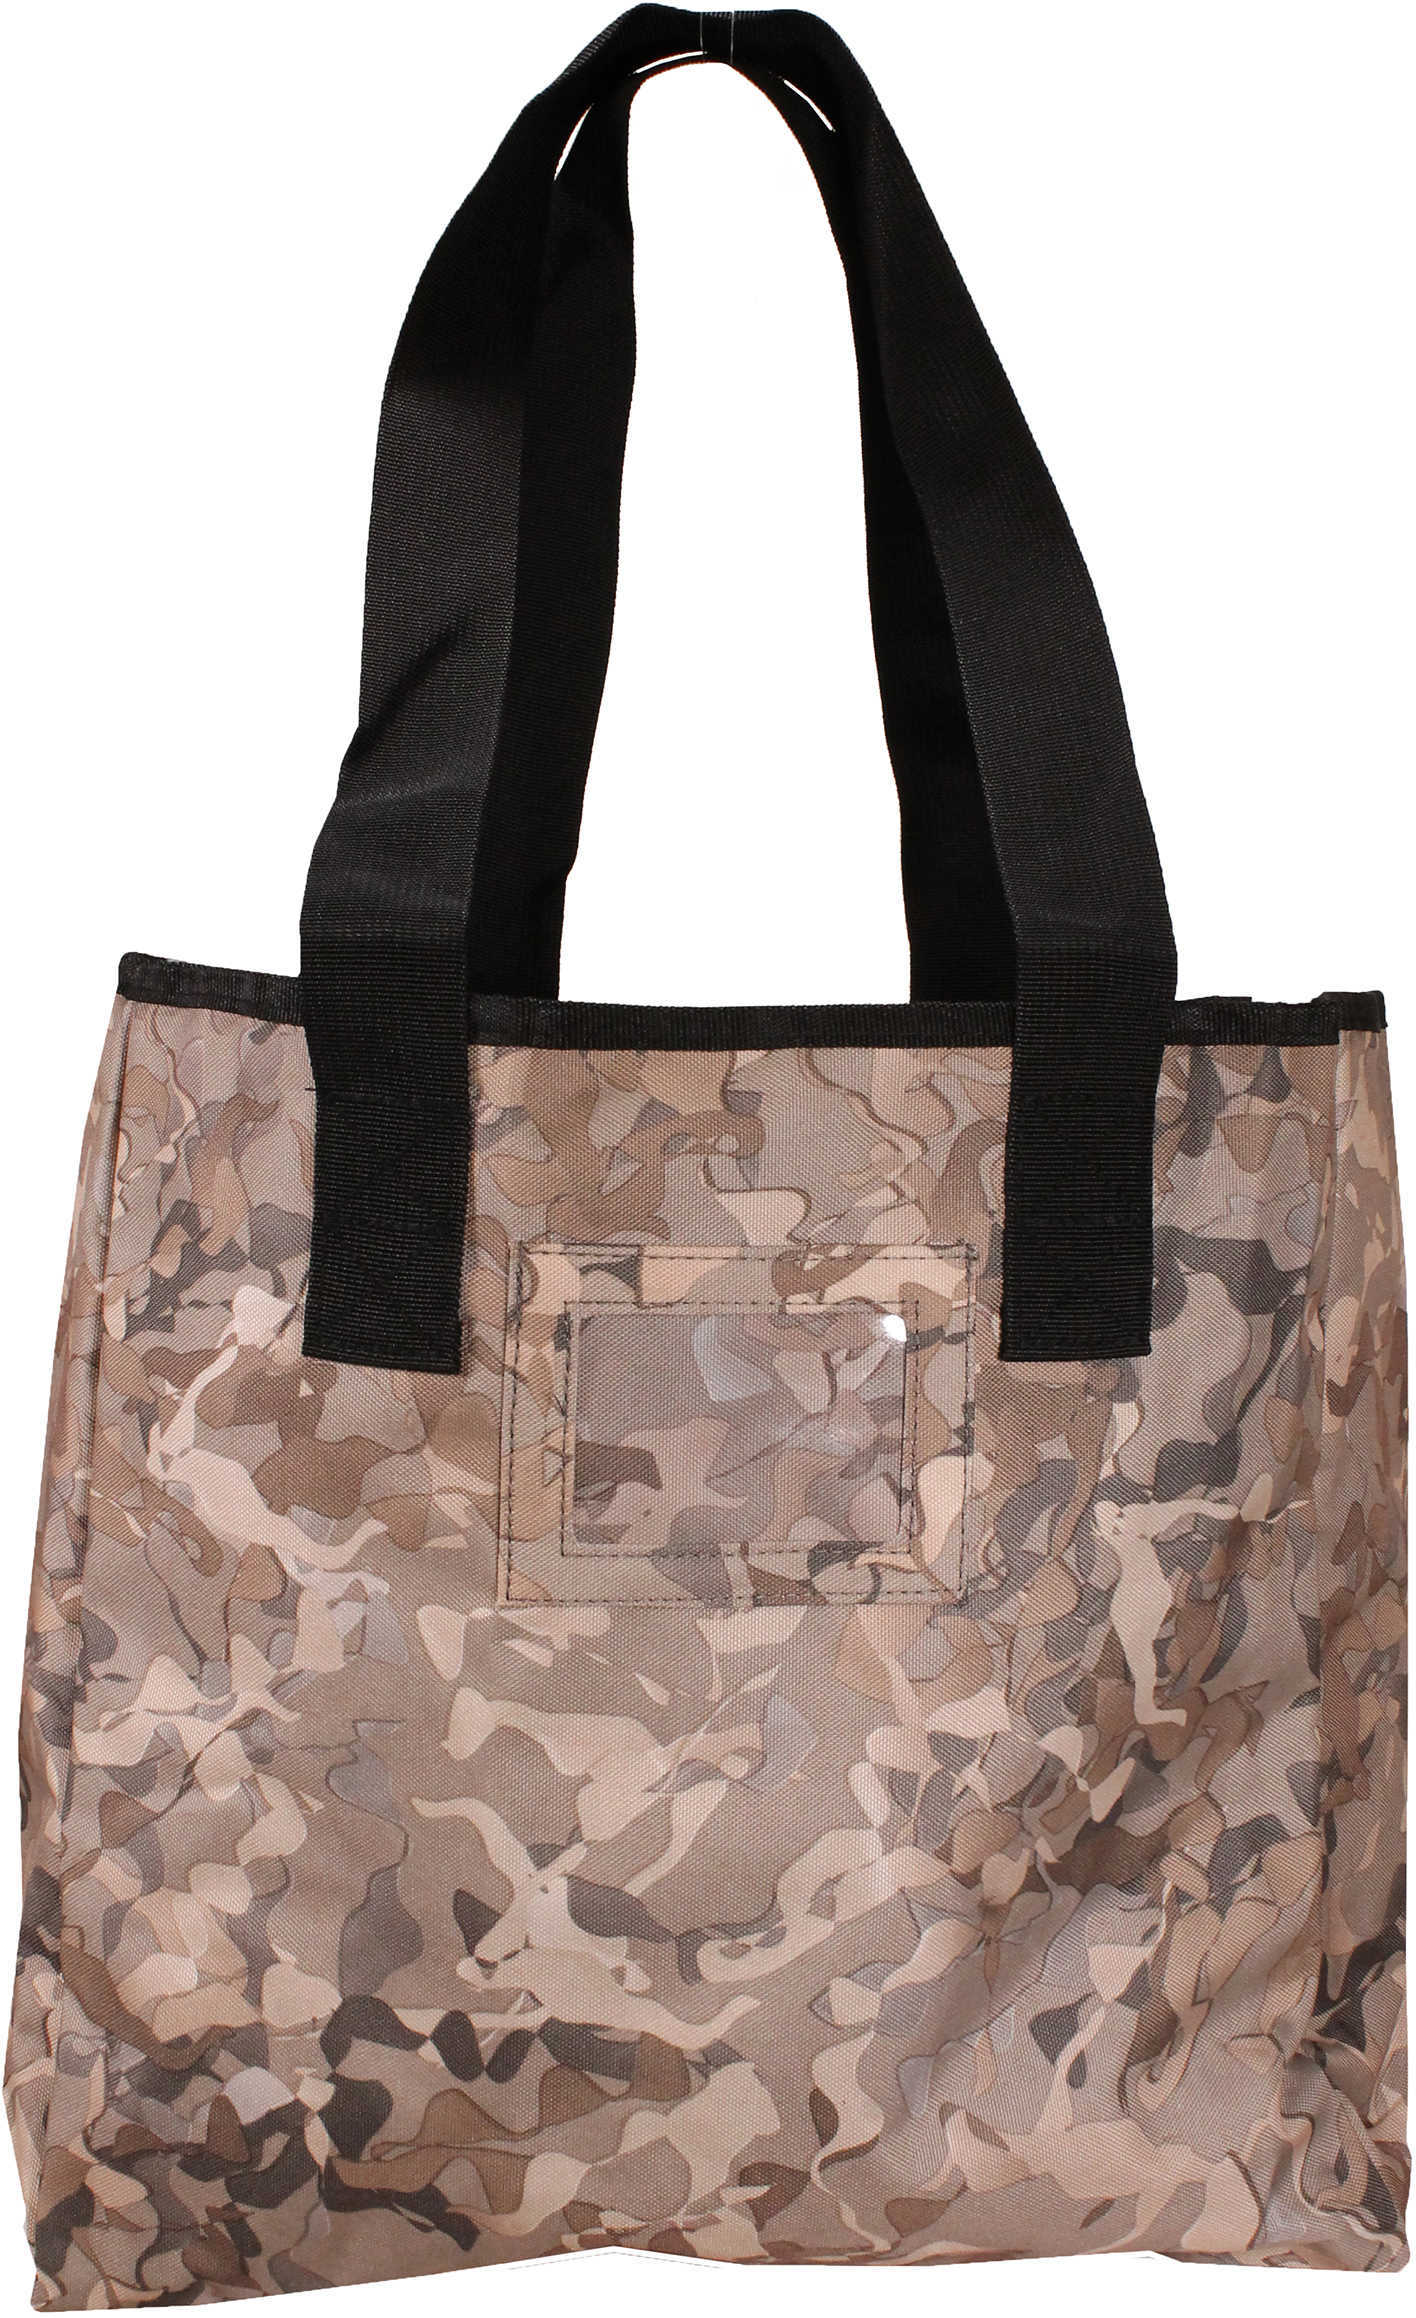 VISM Groccery Shopping Bag Digital Camouflage